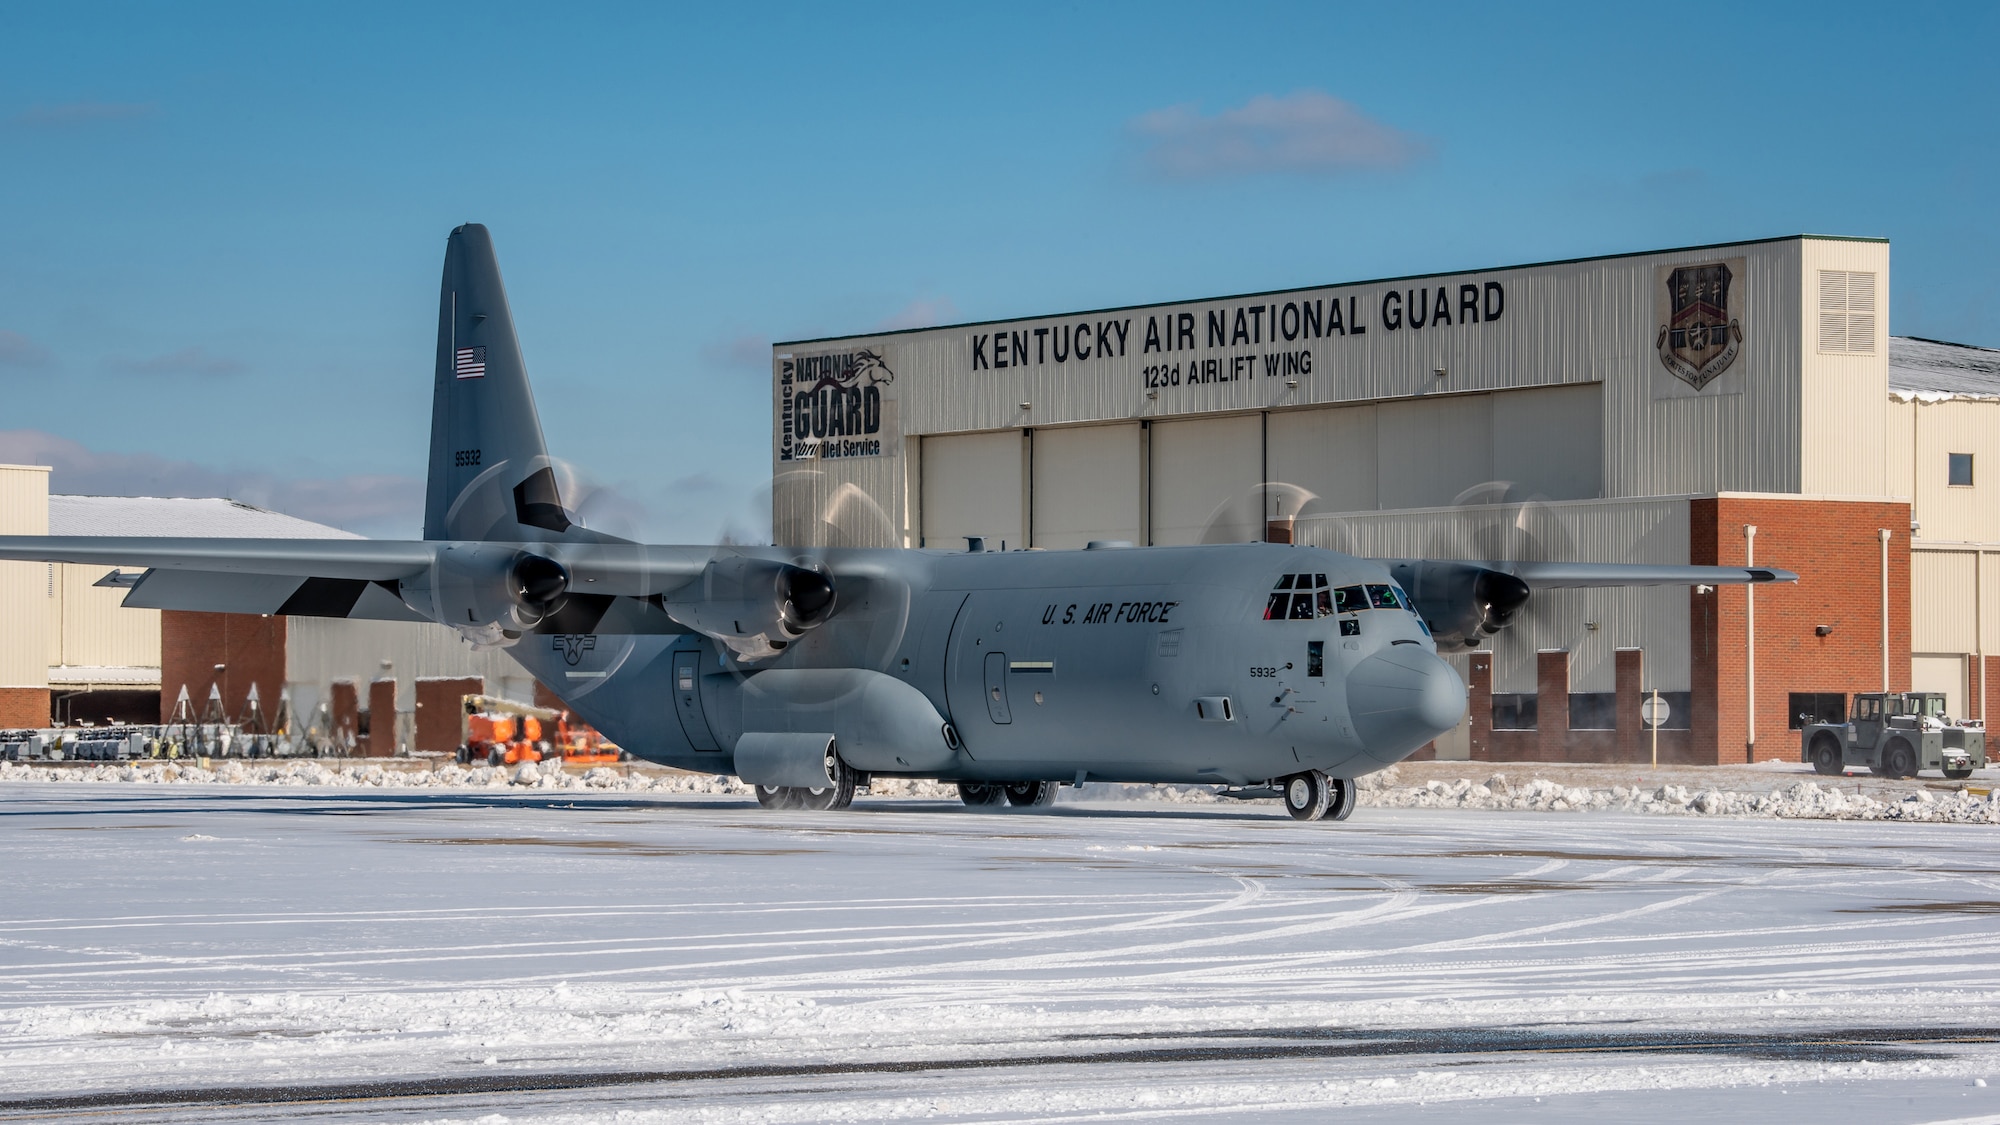 A new U.S. Air Force C-130J Super Hercules aircraft arrives at the Kentucky Air National Guard Base in Louisville, Kentucky, Jan. 7, 2022, with the director of the Air National Guard, U.S. Air Force Lt. Gen. Michael A. Loh, on board. The aircraft, being delivered to the 123rd Airlift Wing from the Lockheed-Martin factory in Marietta, Georgia, is the third of eight slated for the unit, which is converting from legacy C-130H transports. (U.S. Air National Guard photo by Dale Greer)